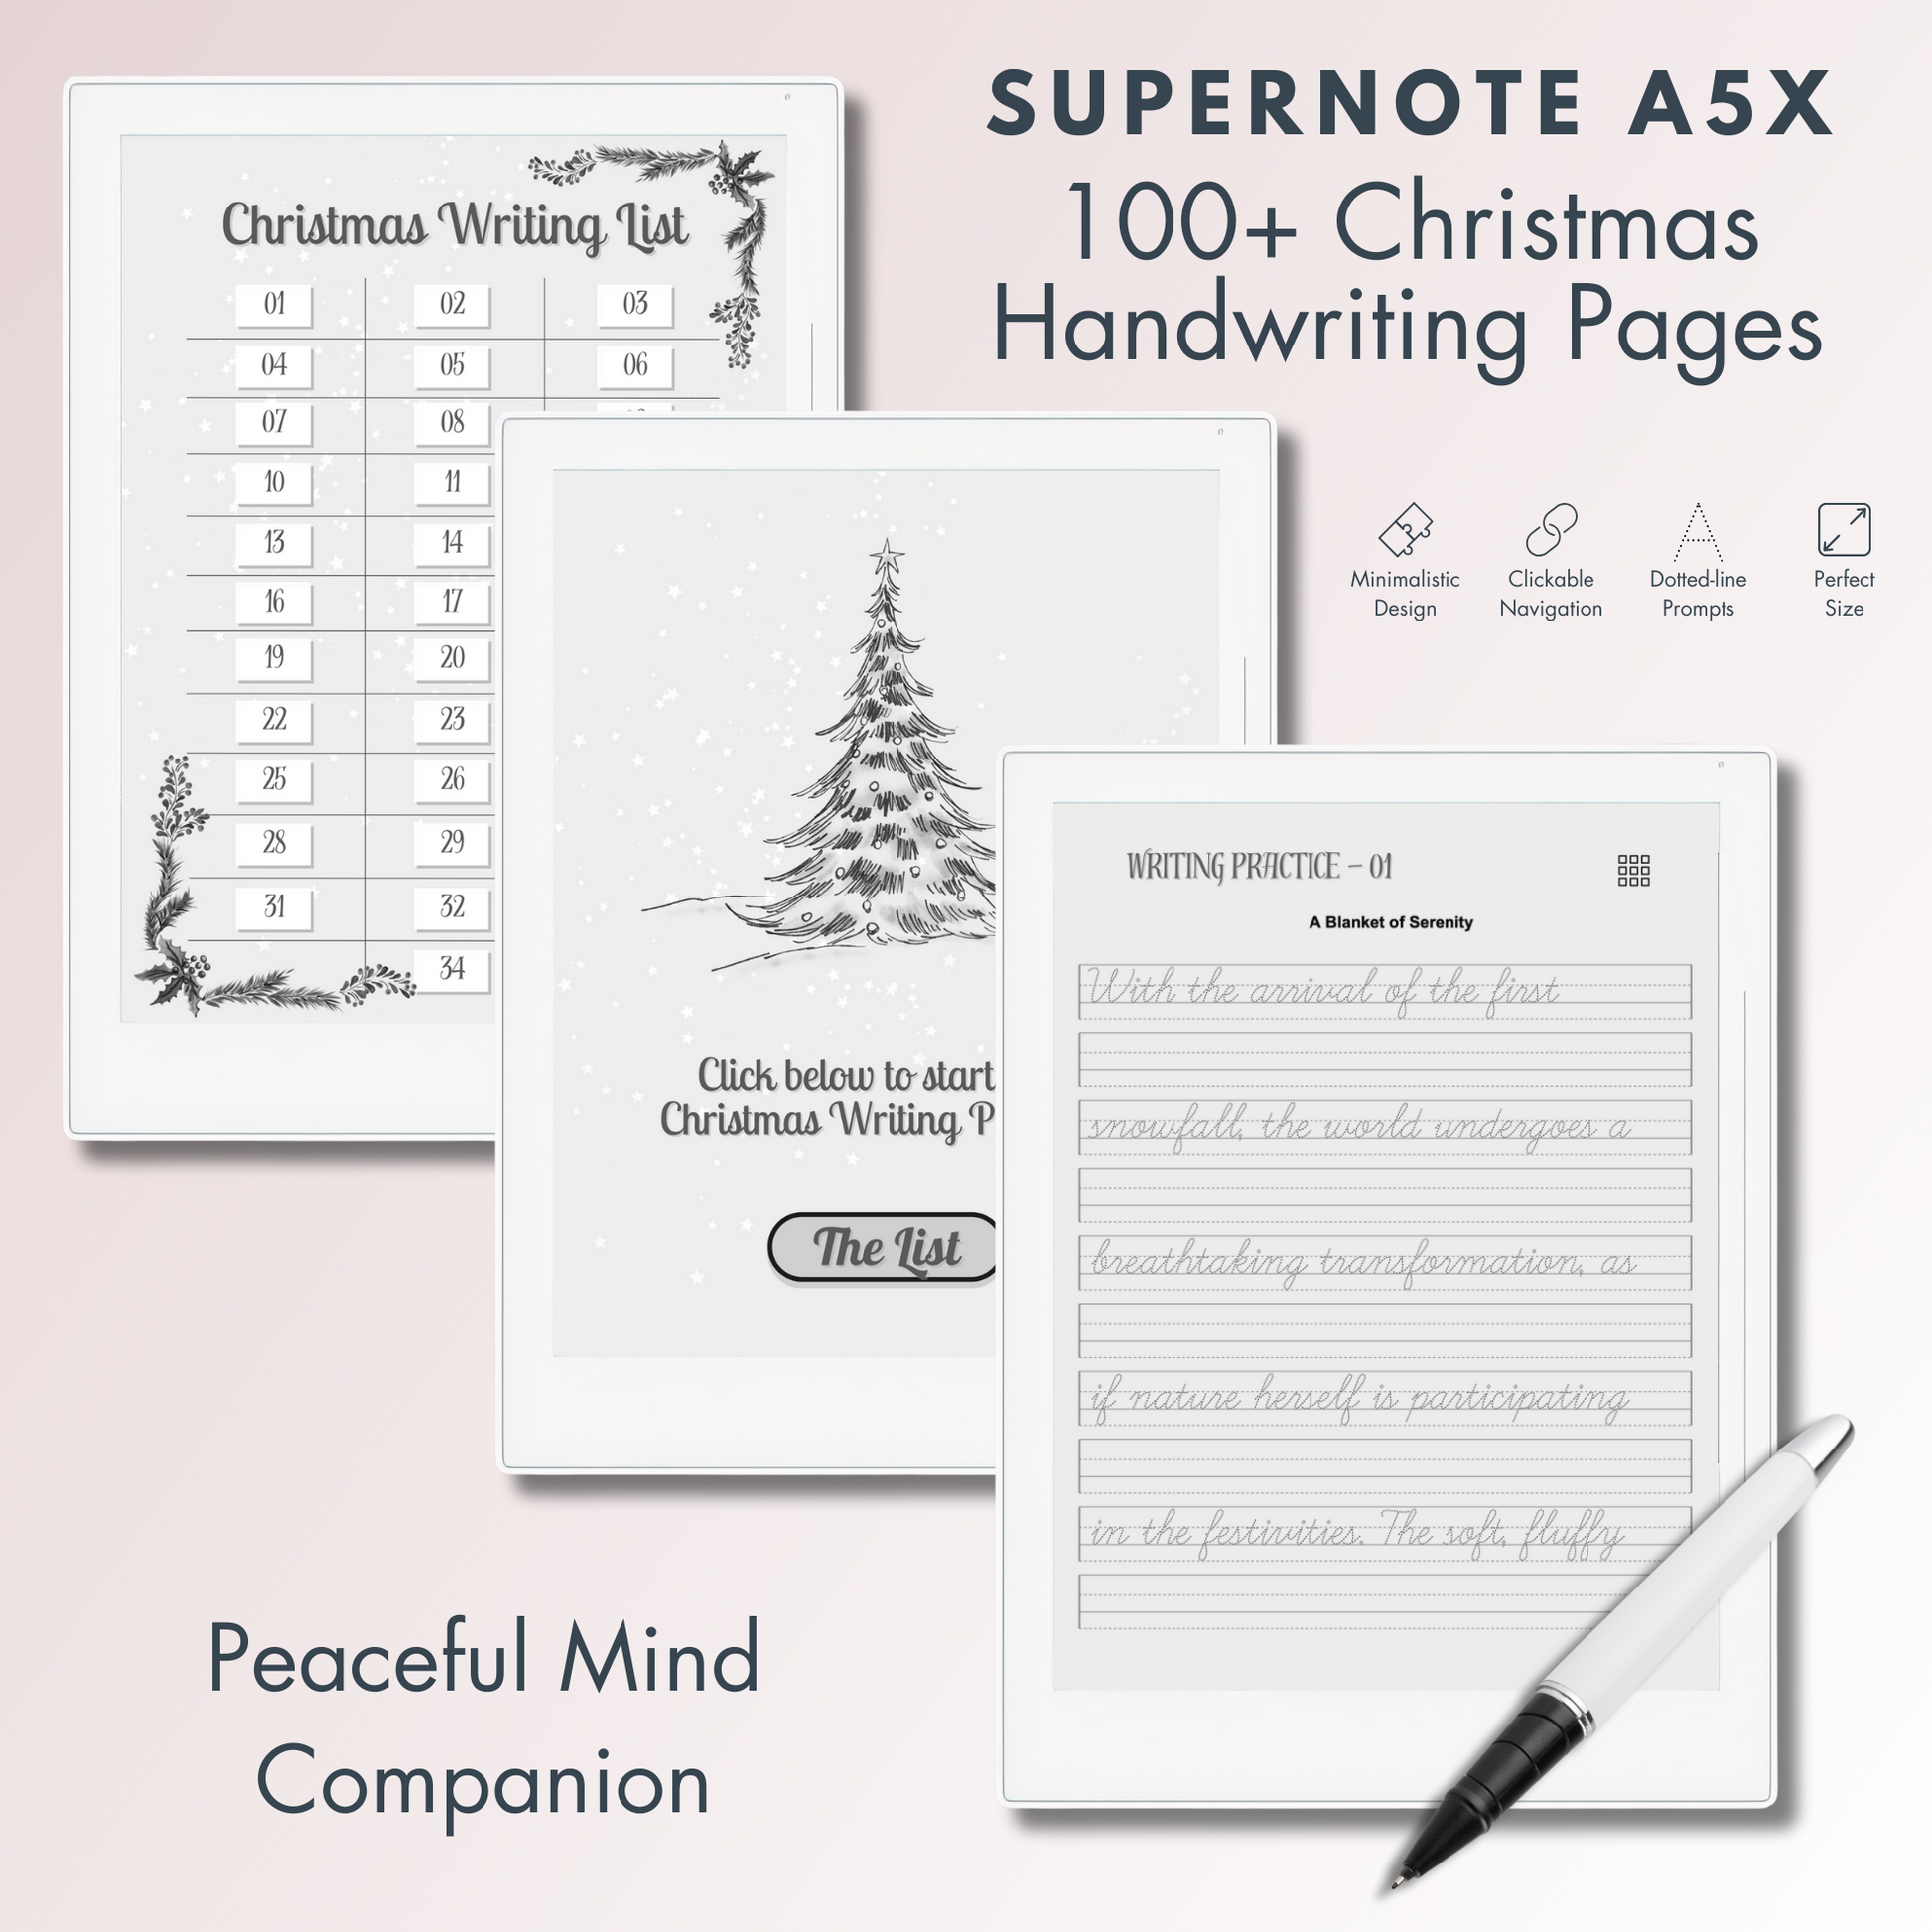 This is a Digital Download of Christmas-themed Handwriting Dotted-line Pages designed for Supernote A5X and A6X. 